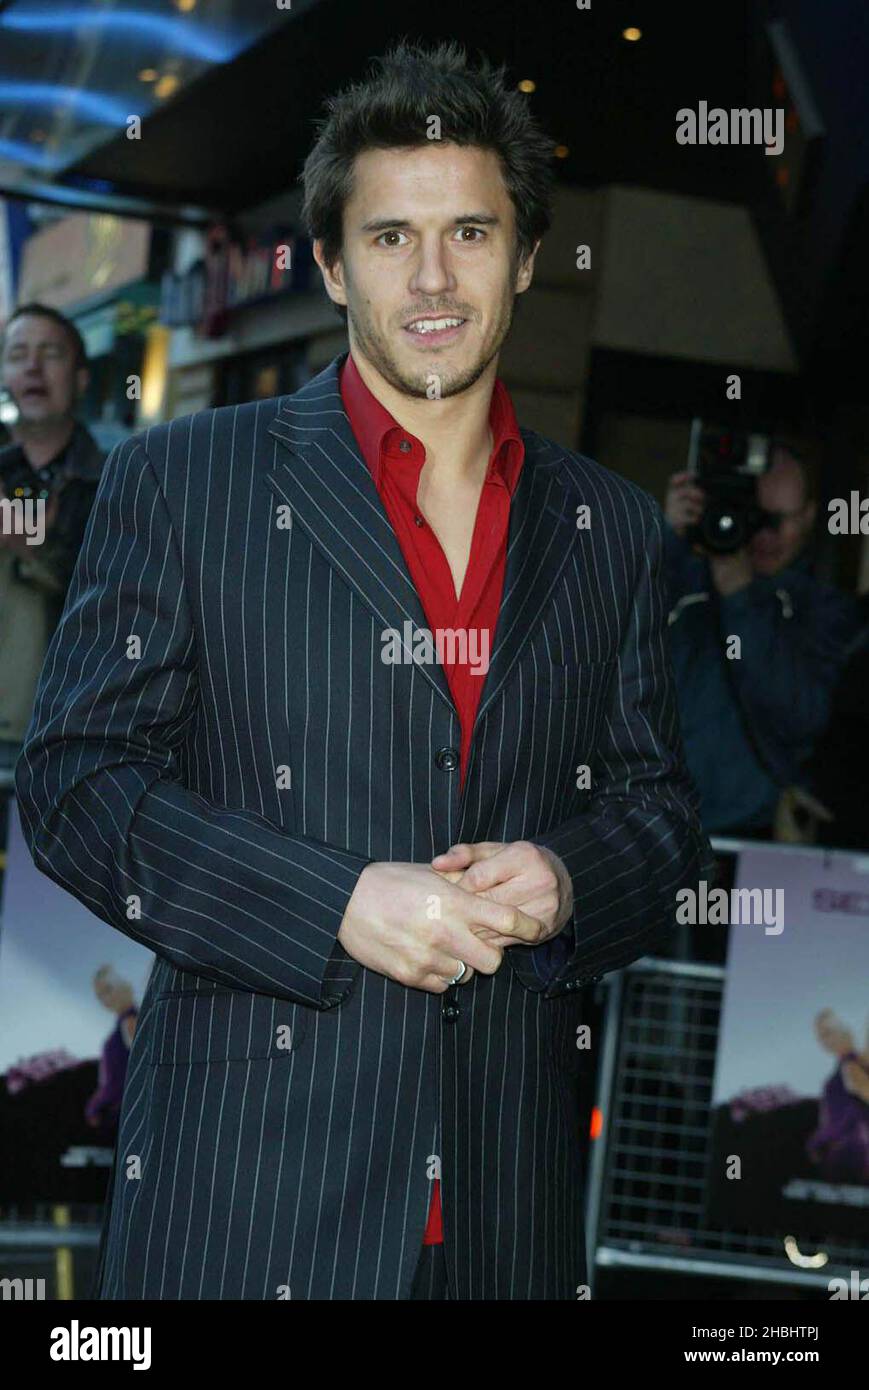 Jeremy Edwards photographed at the Premiere of S Club's movie 'Seeing Double' in Leicester Square. 1/2 length Stock Photo